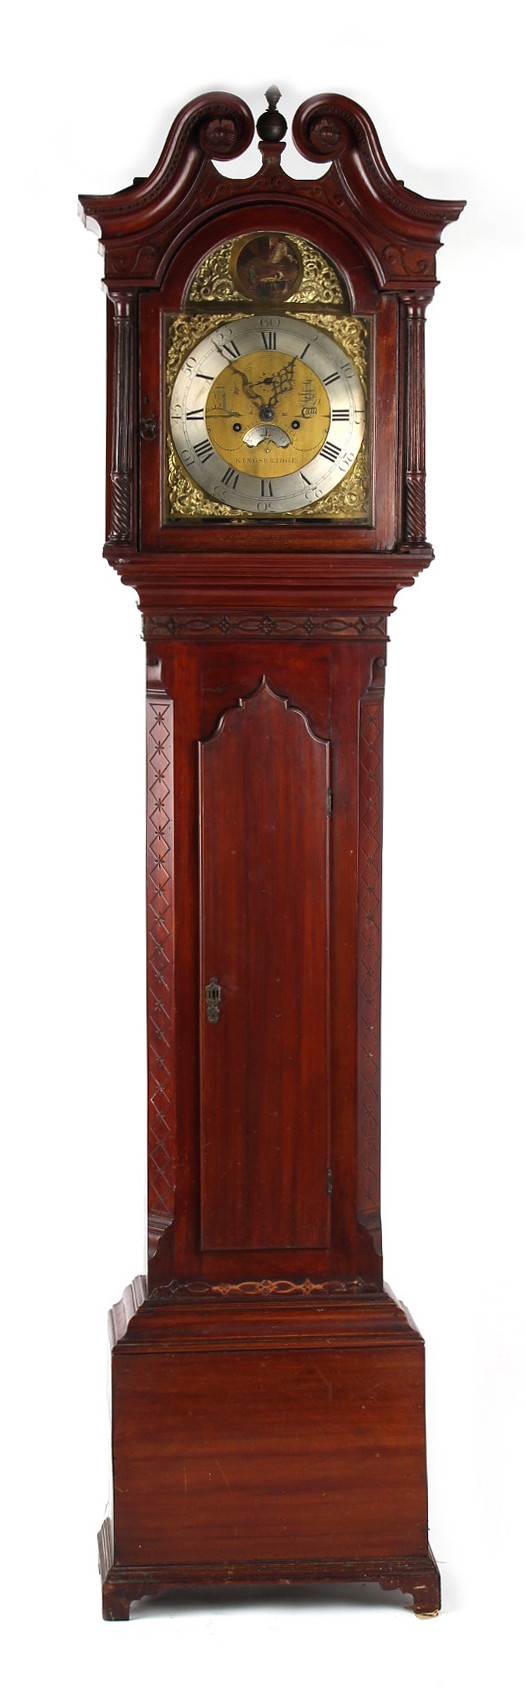 Property of a lady - a mahogany longcase clock with blind fretwork decorations, the brass dial